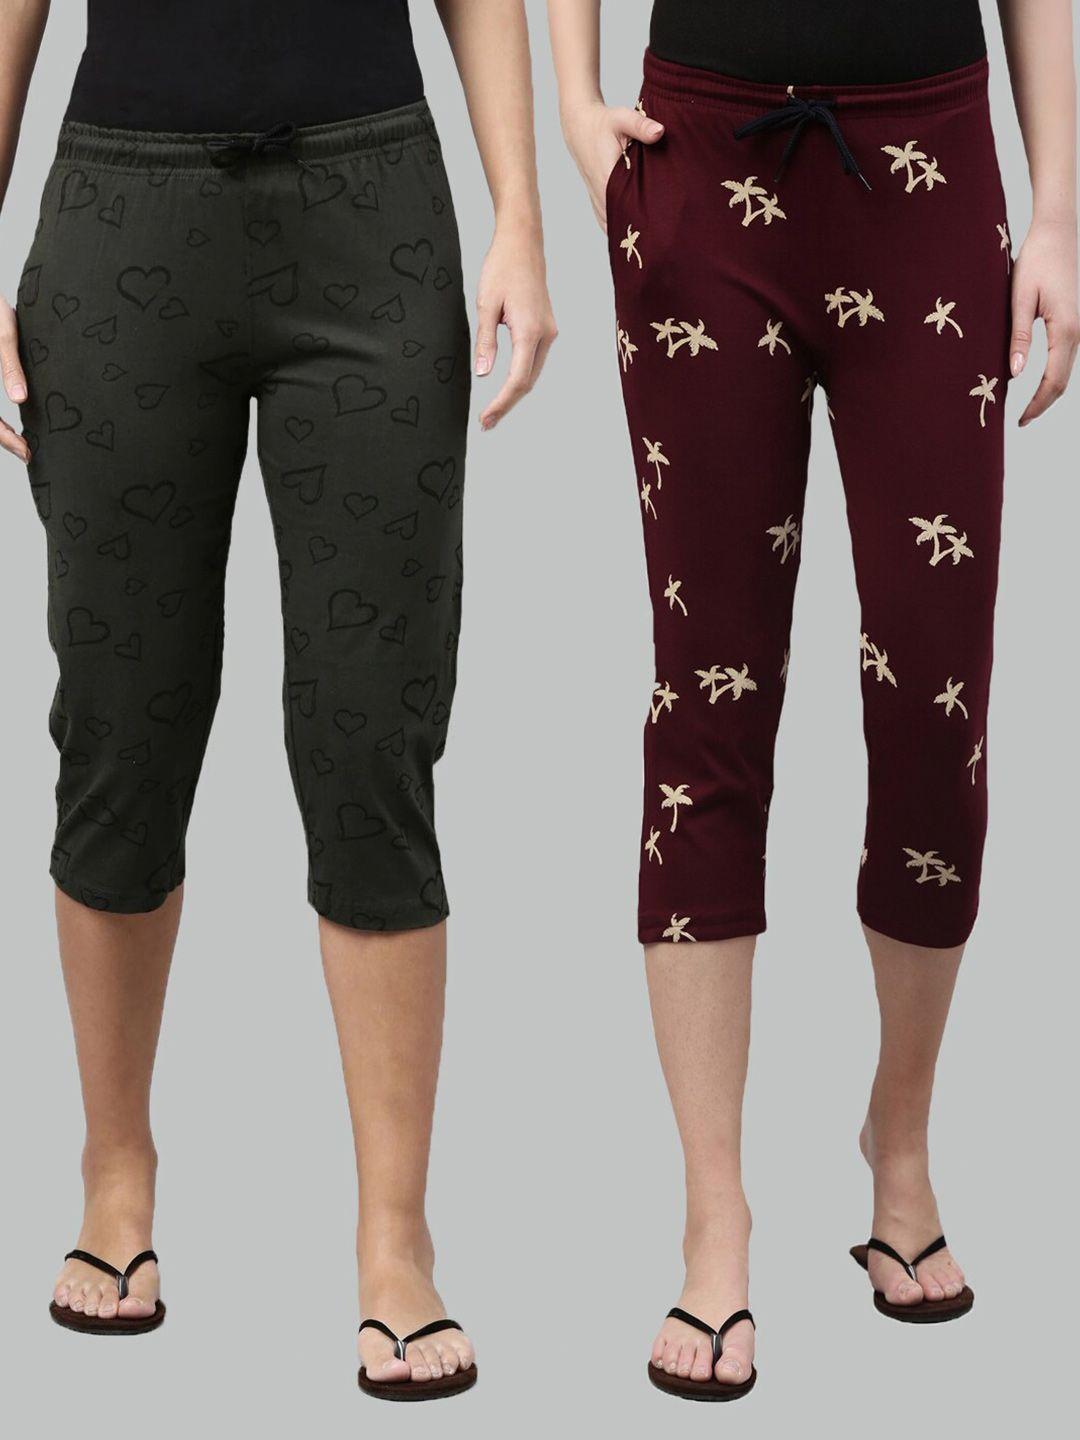 kryptic women olive green & maroon pack of 2 printed cotton capris